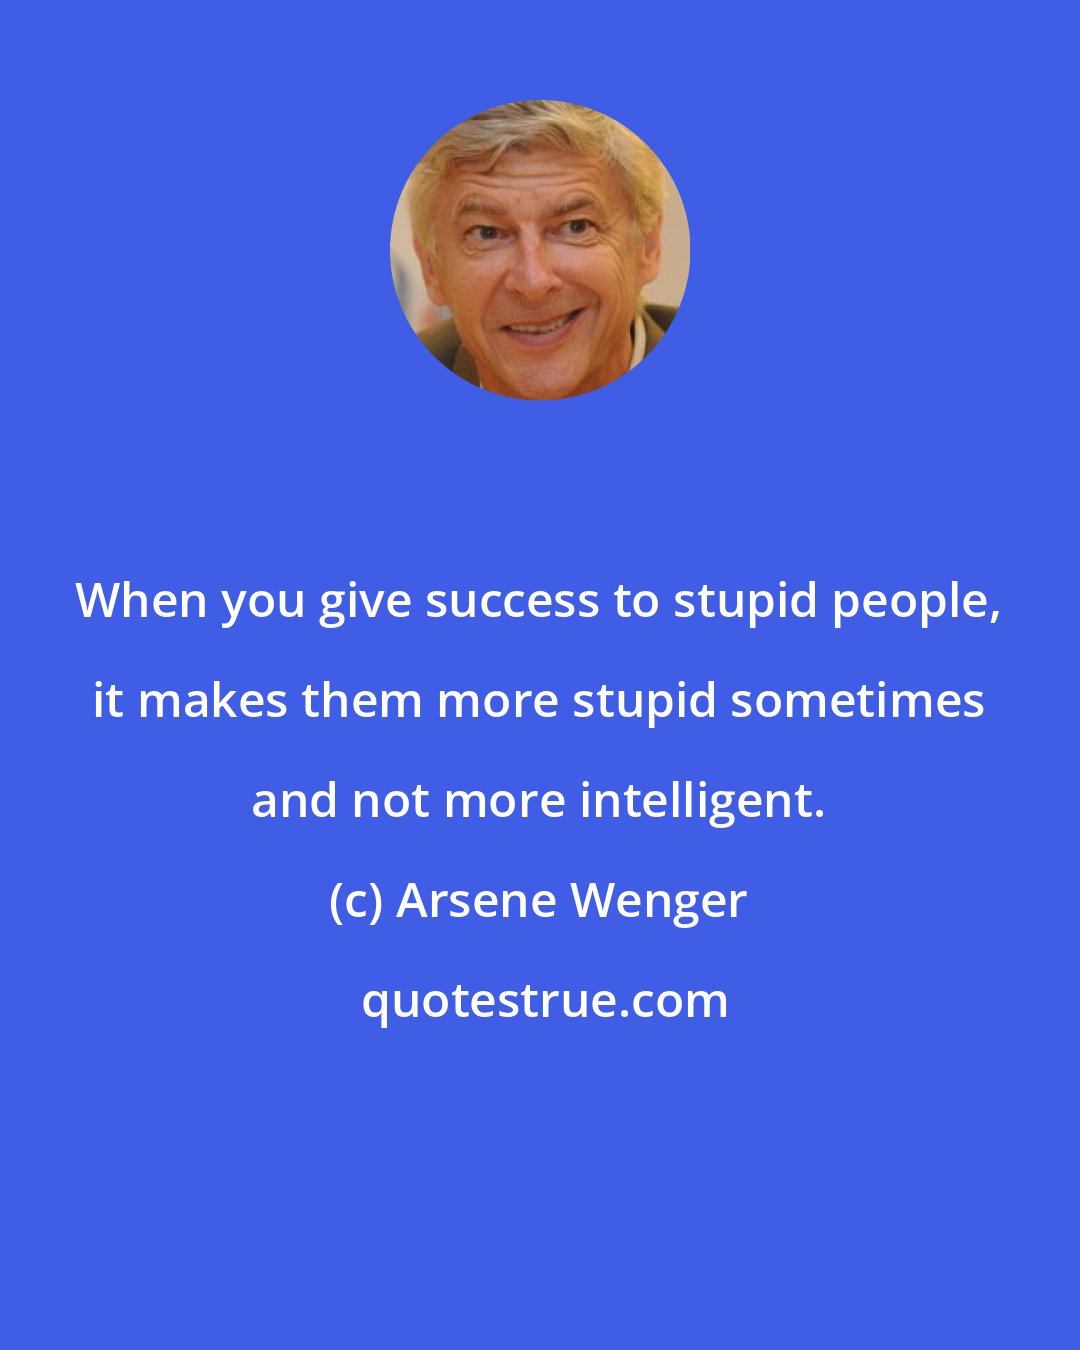 Arsene Wenger: When you give success to stupid people, it makes them more stupid sometimes and not more intelligent.